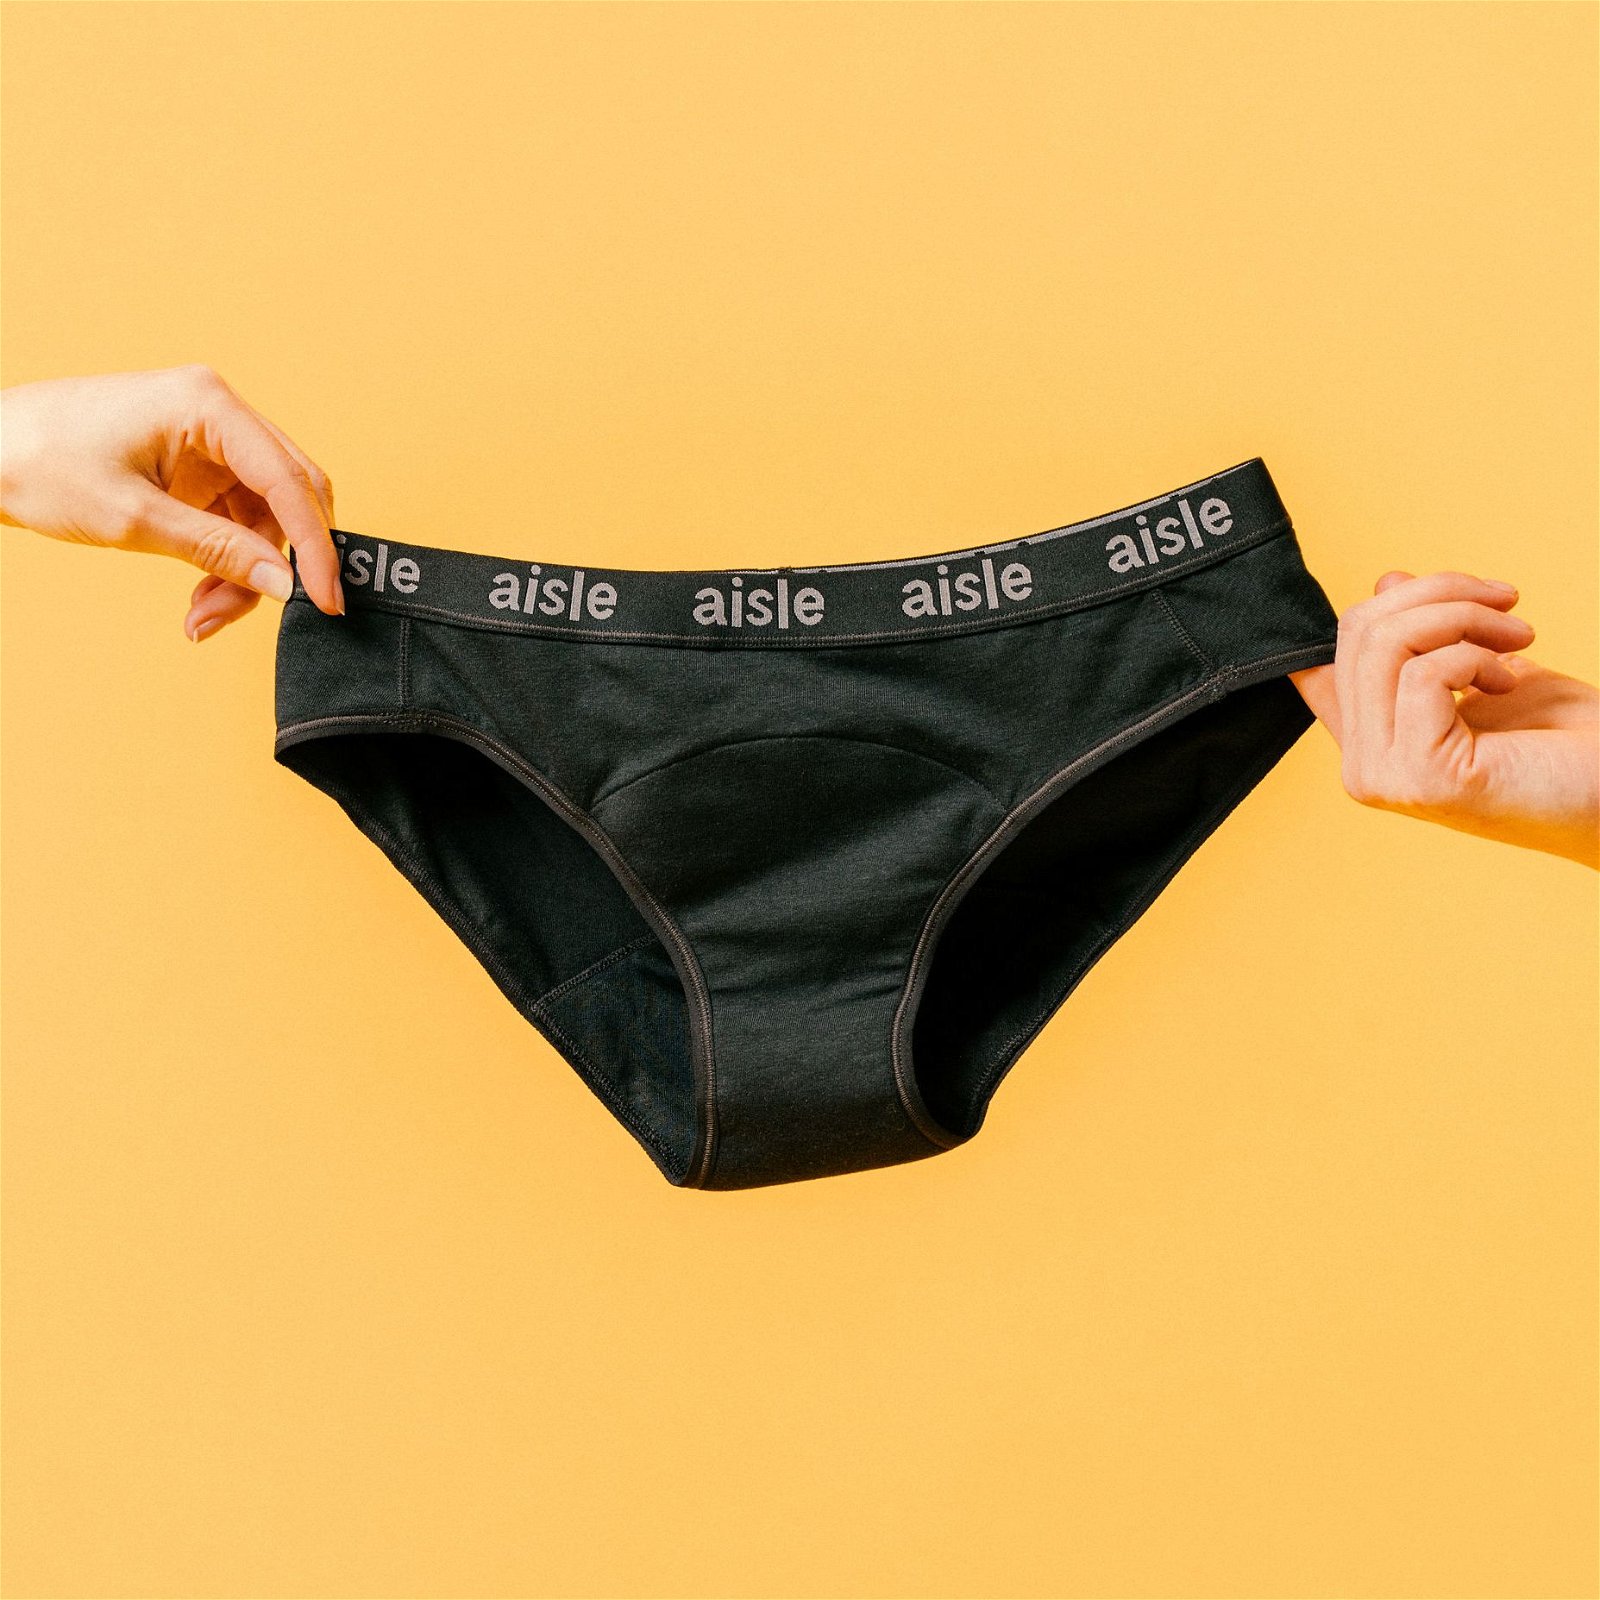 Period Aisle: Get 20% Off Black Boost Undies, While You Can | Milled